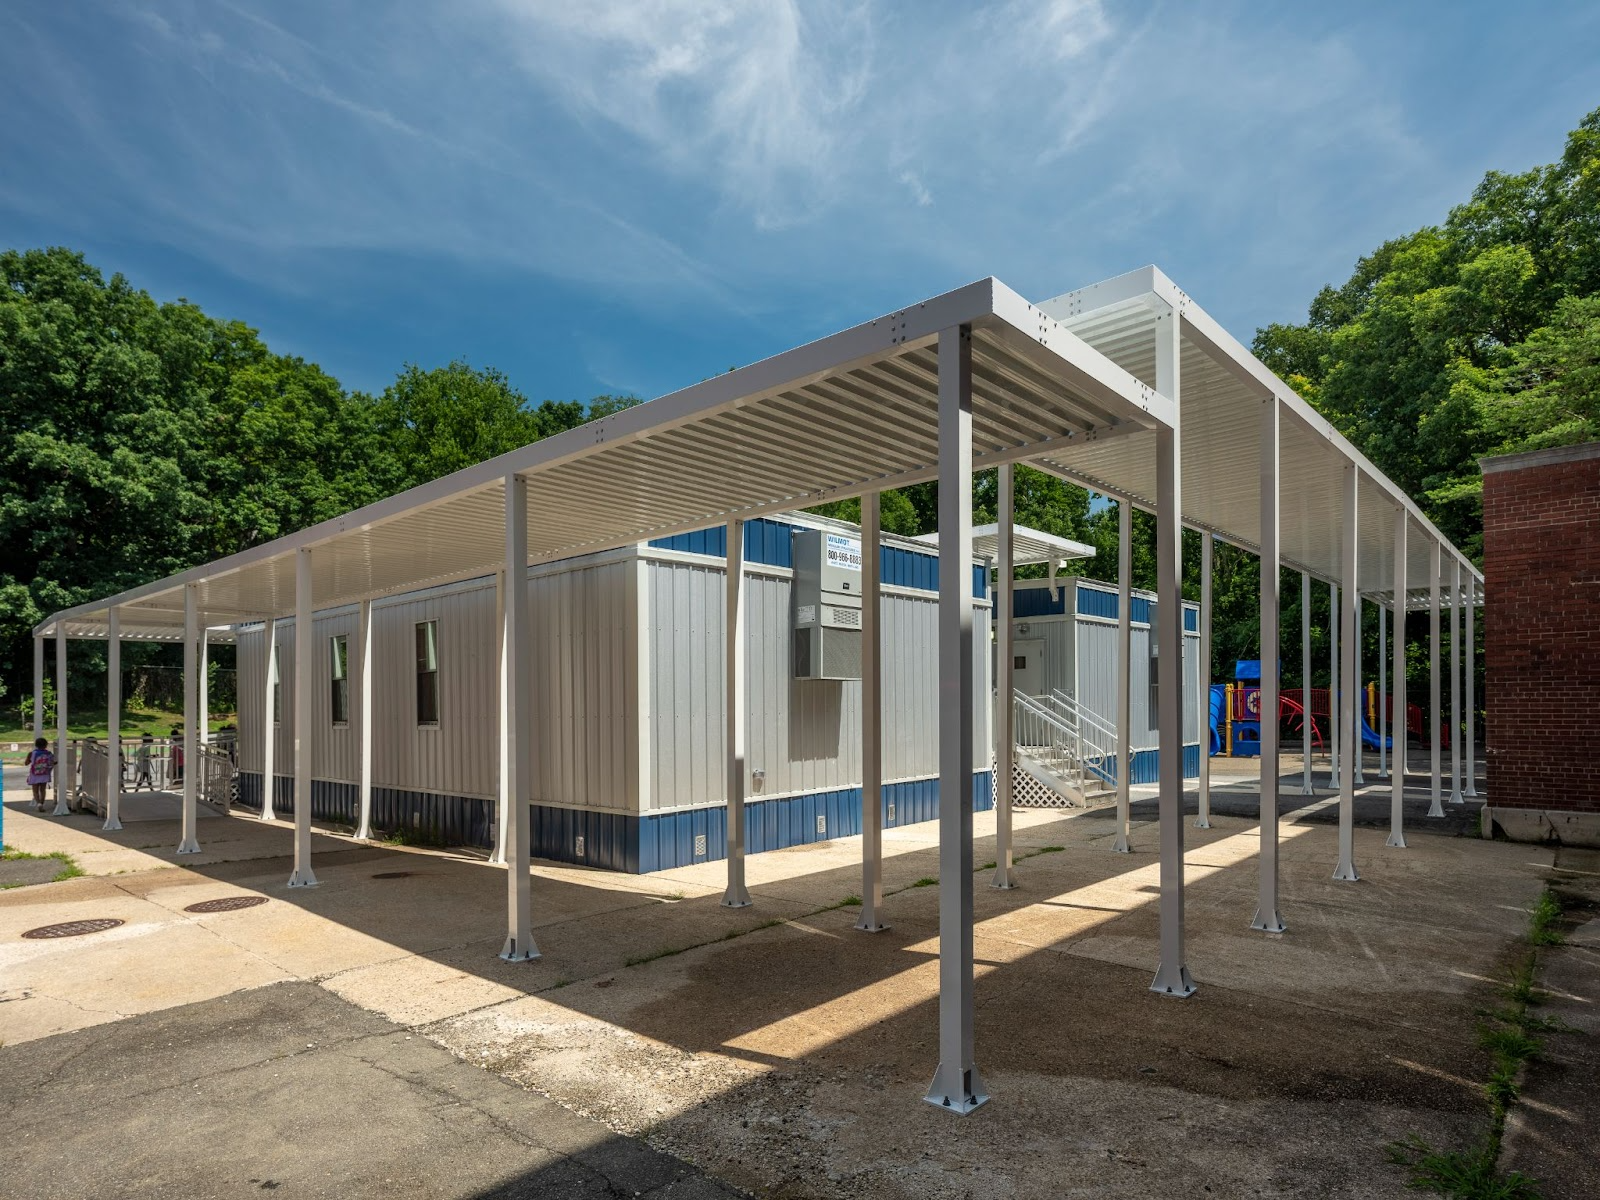 Classroom space and canopy